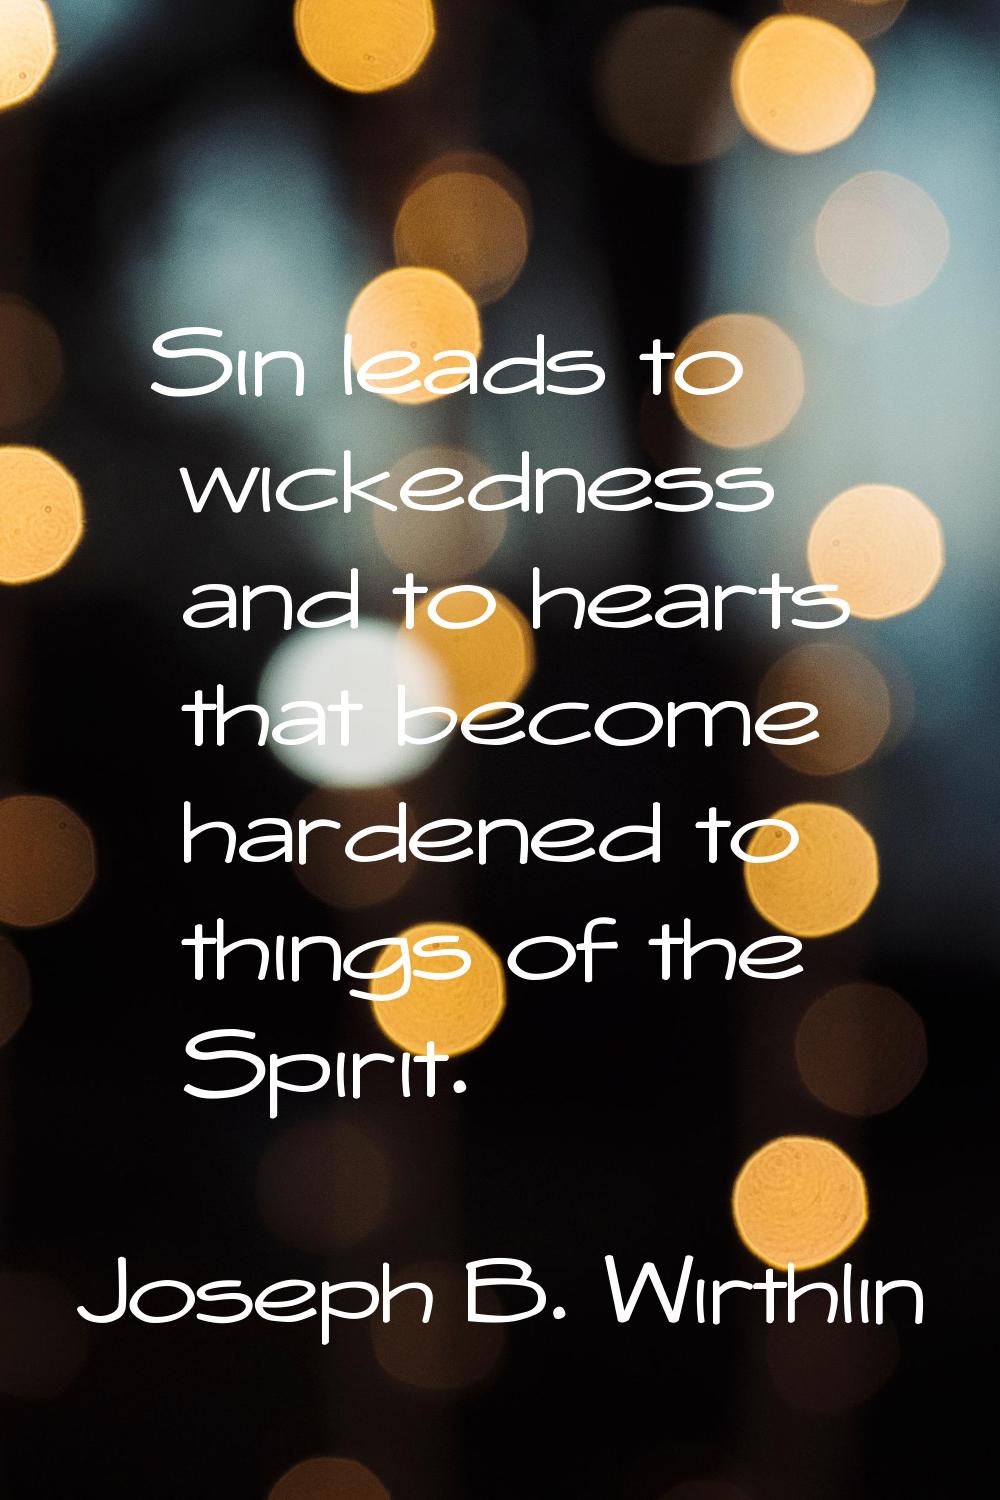 Sin leads to wickedness and to hearts that become hardened to things of the Spirit.